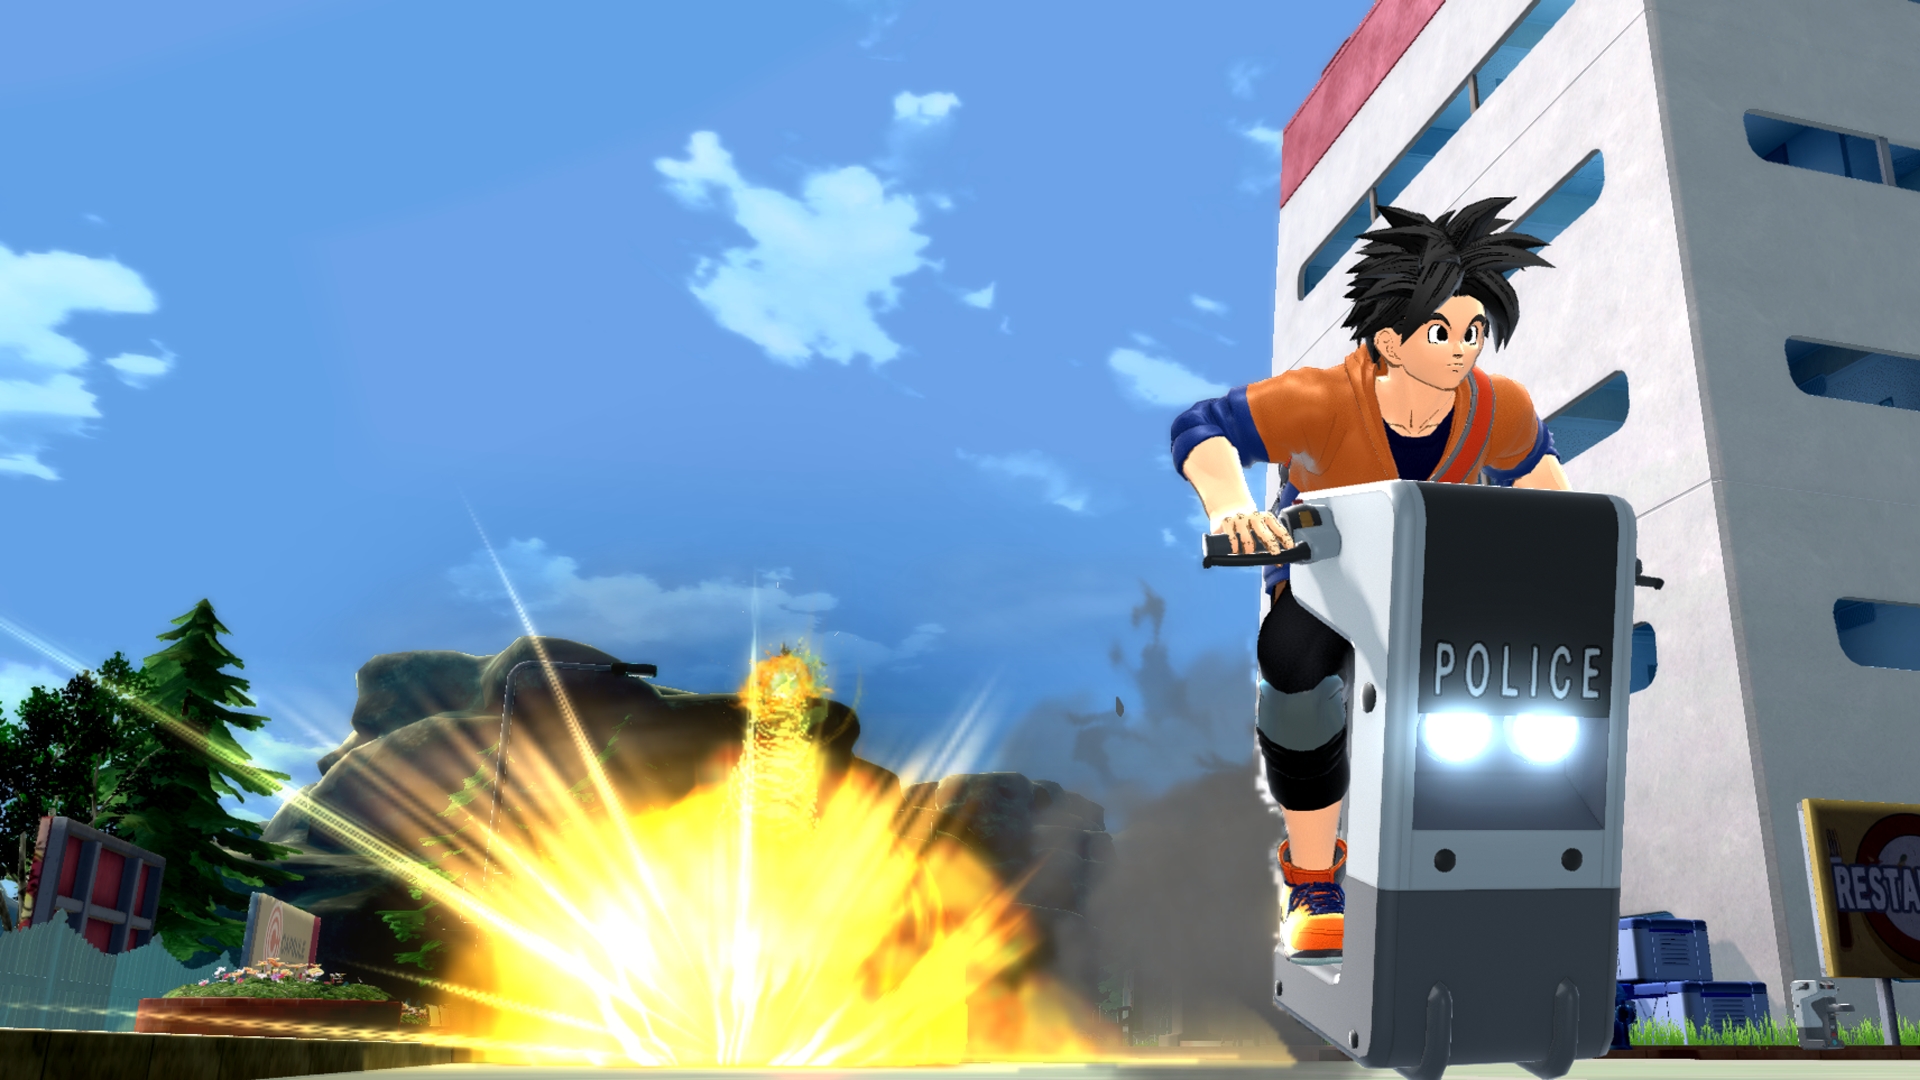 DRAGON BALL: THE BREAKERS, a new asymmetrical online multiplayer game in  the legendary Dragon Ball franchise announced